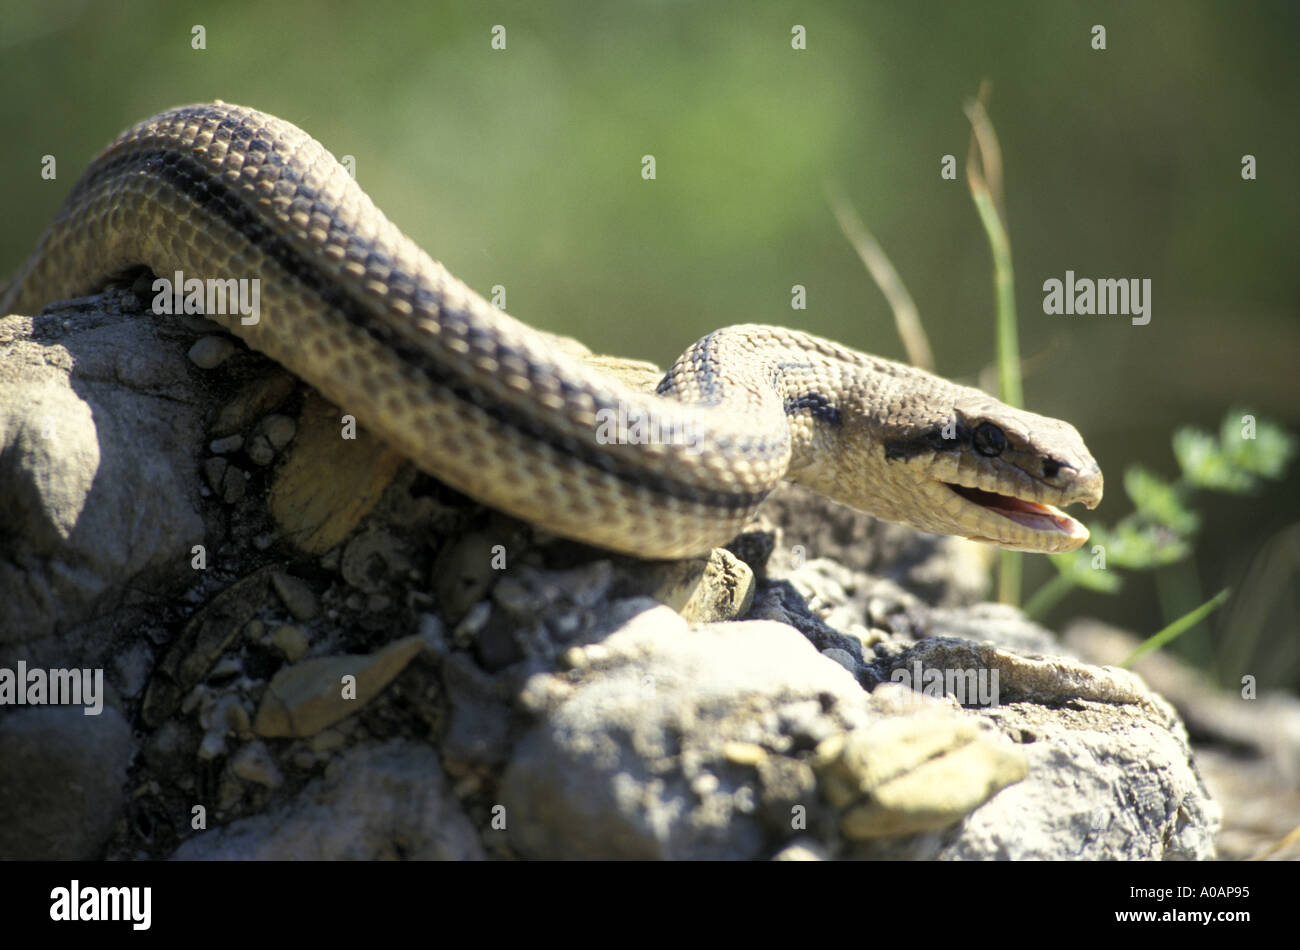 Four lined snake Italy Stock Photo